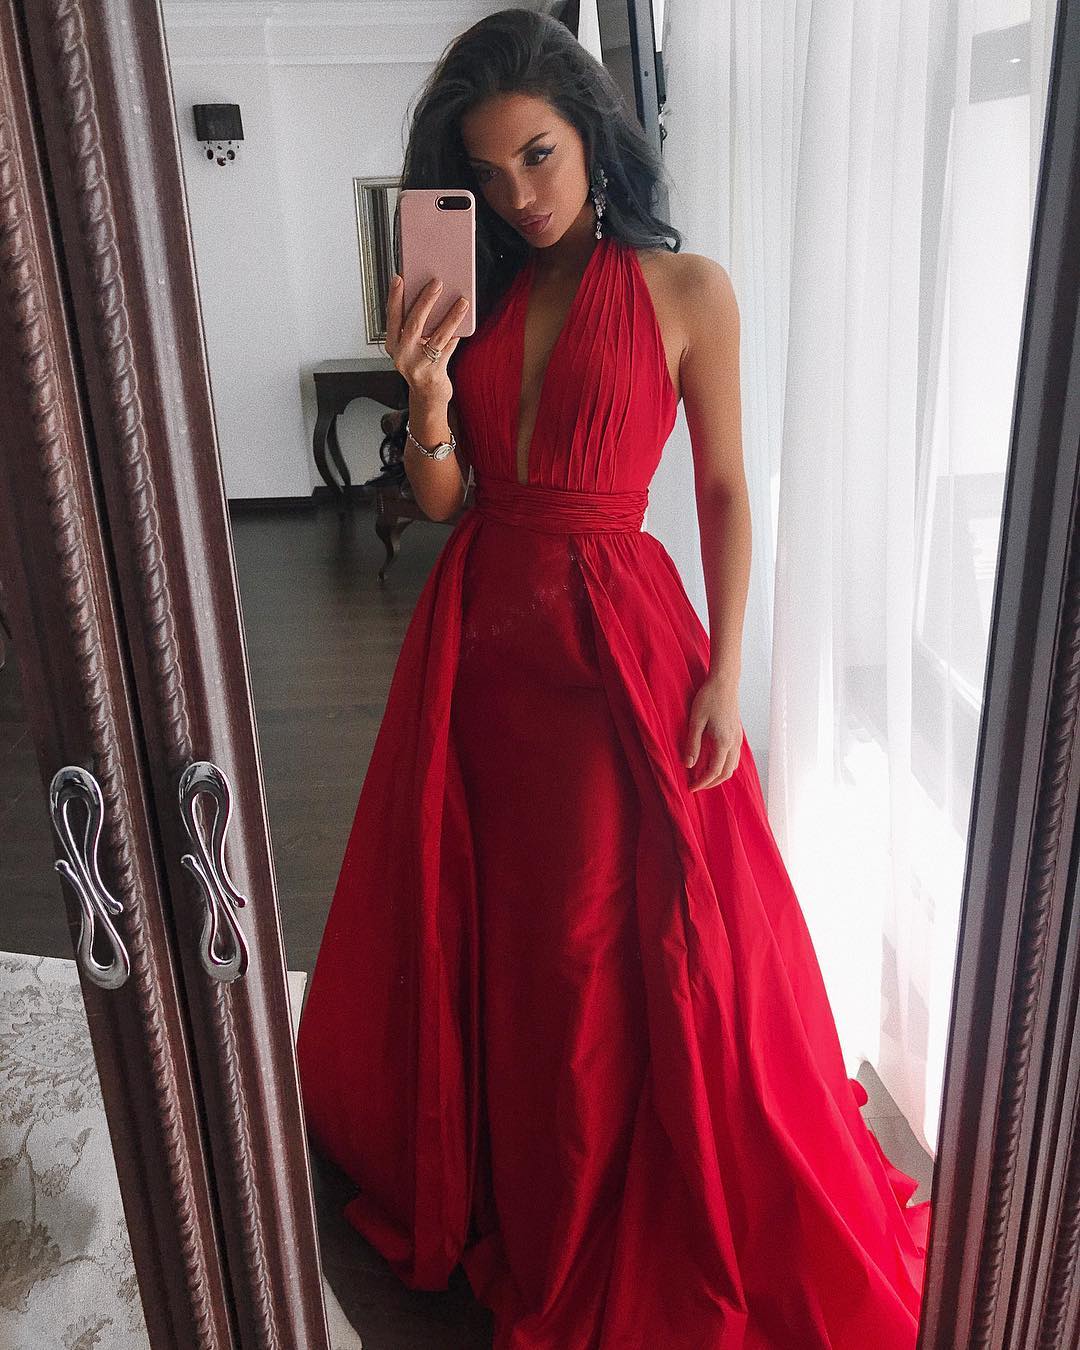 red and black rose prom dress